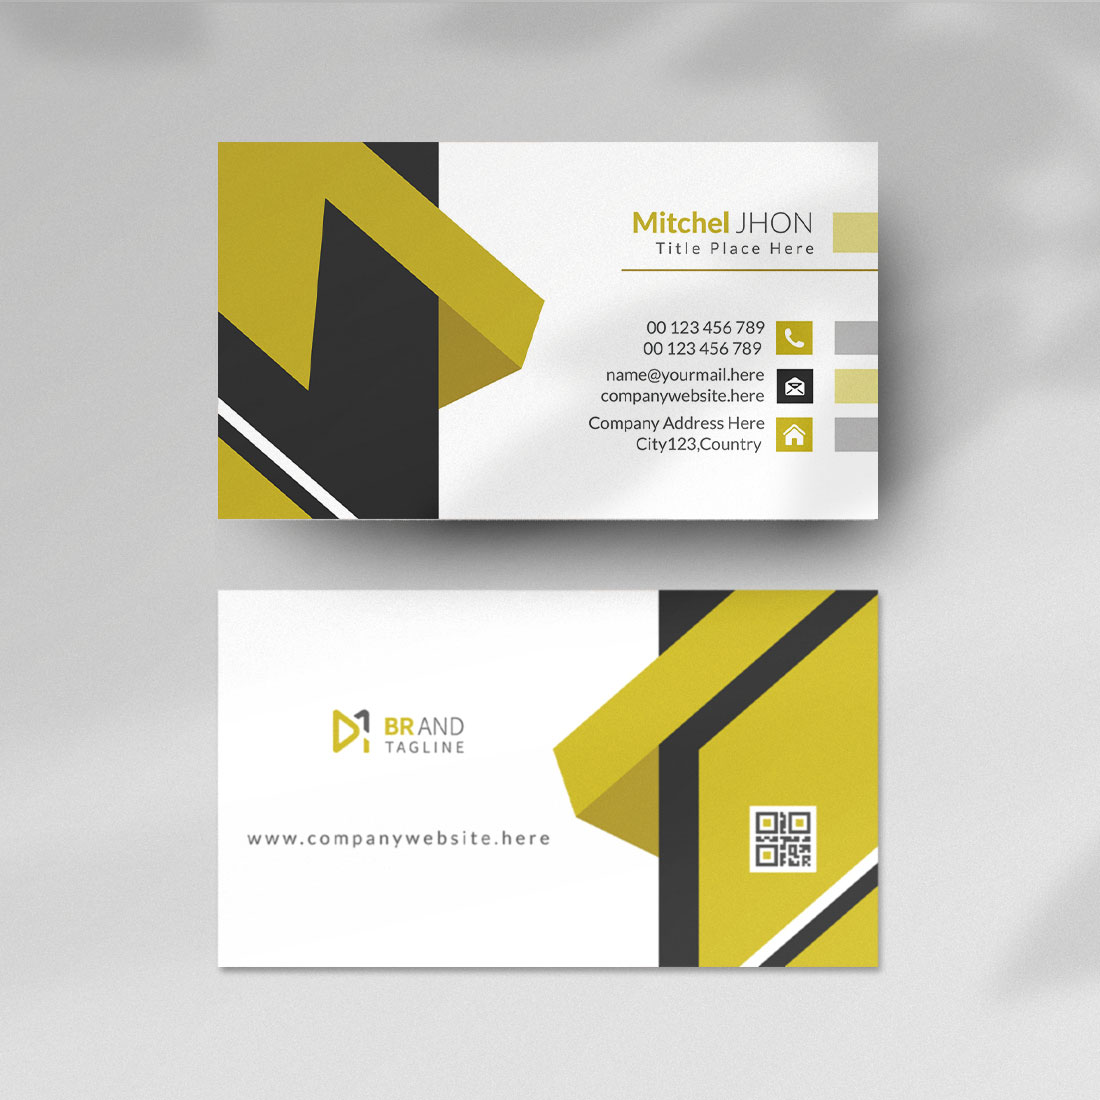 Business card design template cover image.